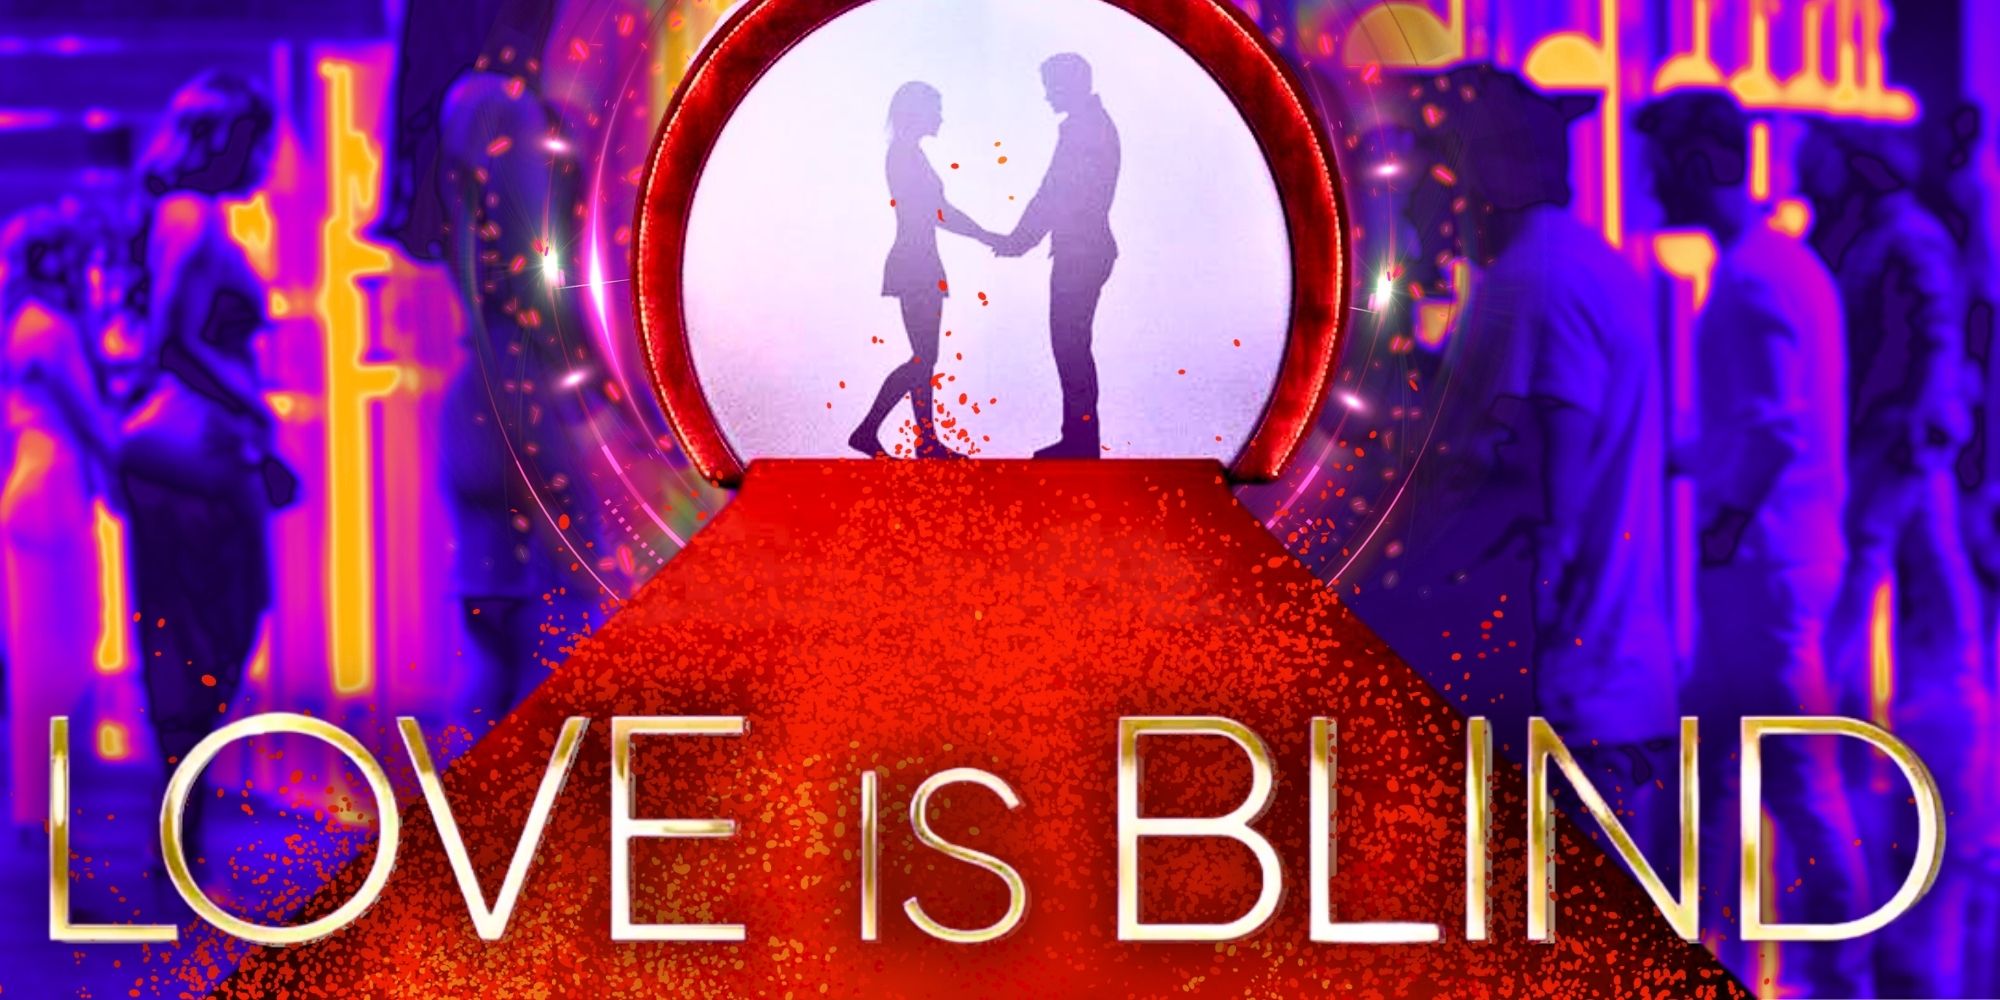 Love Is Blind Seasons Ranked By Most To Least Entertaining